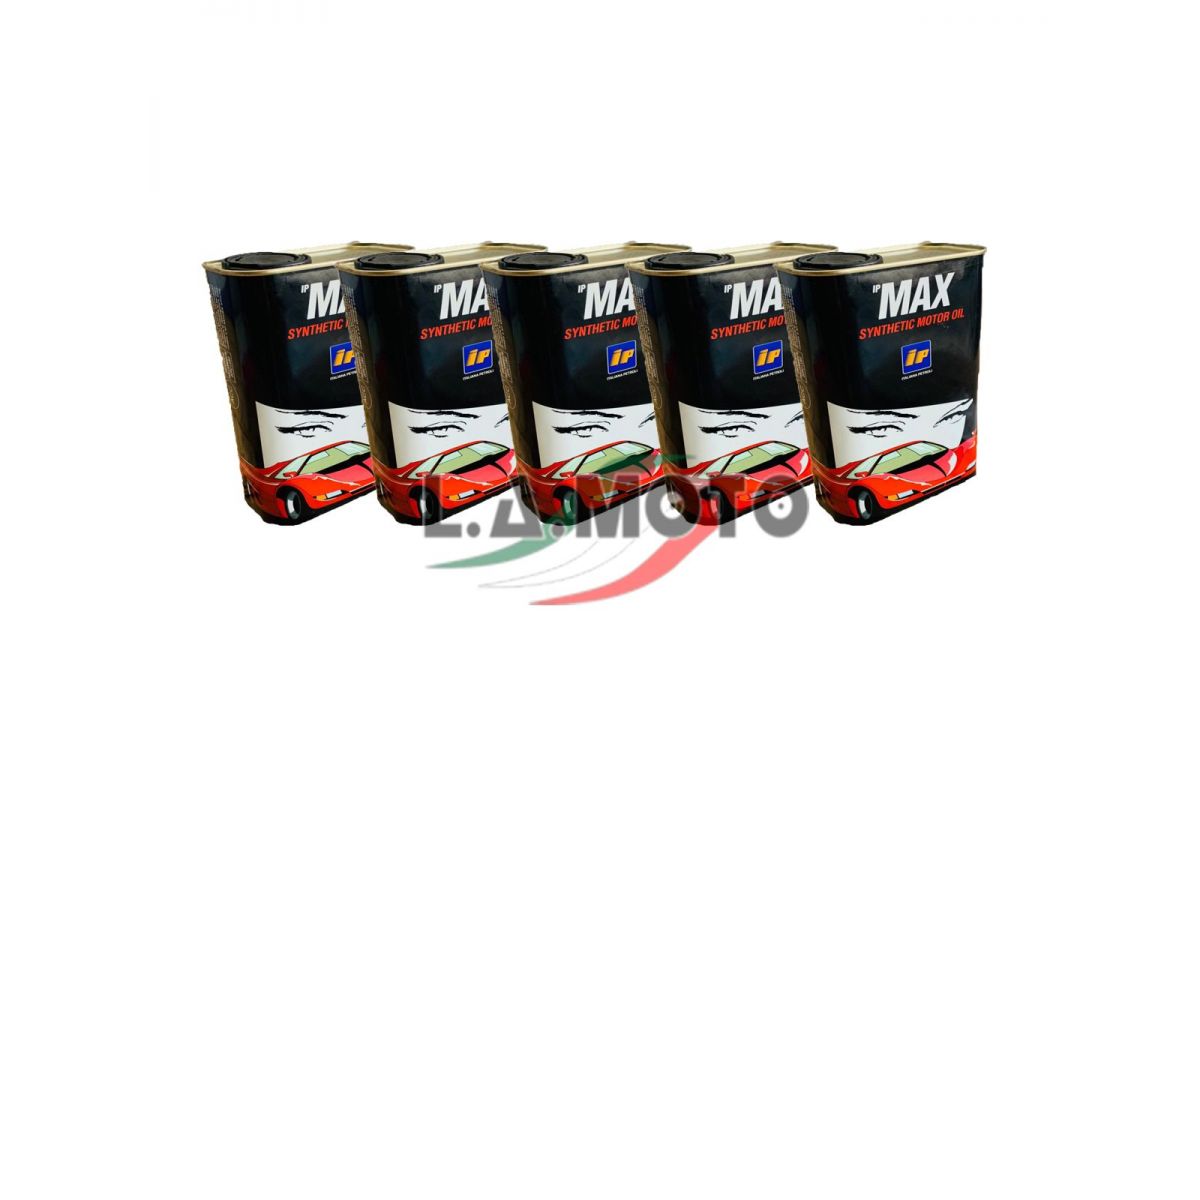 Synthetic motor oil IP MAX 5L